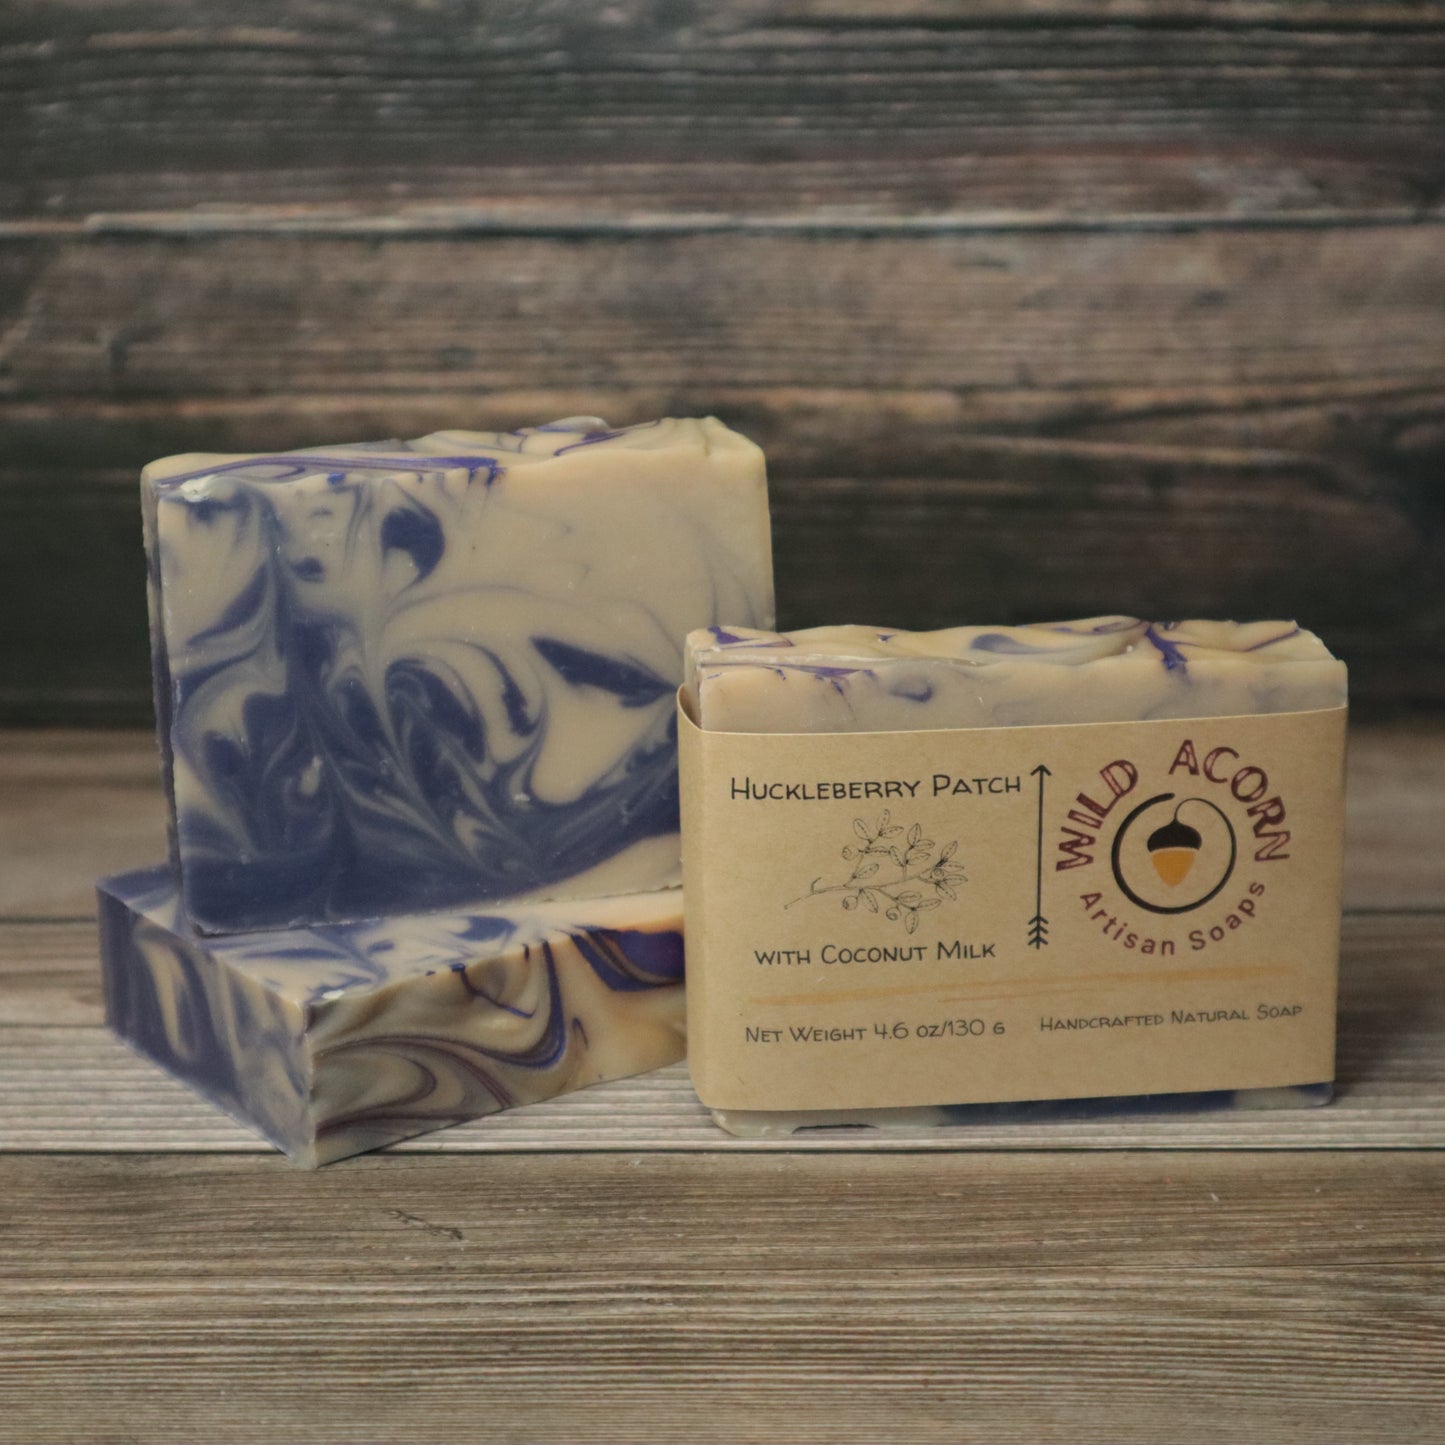 Huckleberry Patch Soap with Coconut Milk